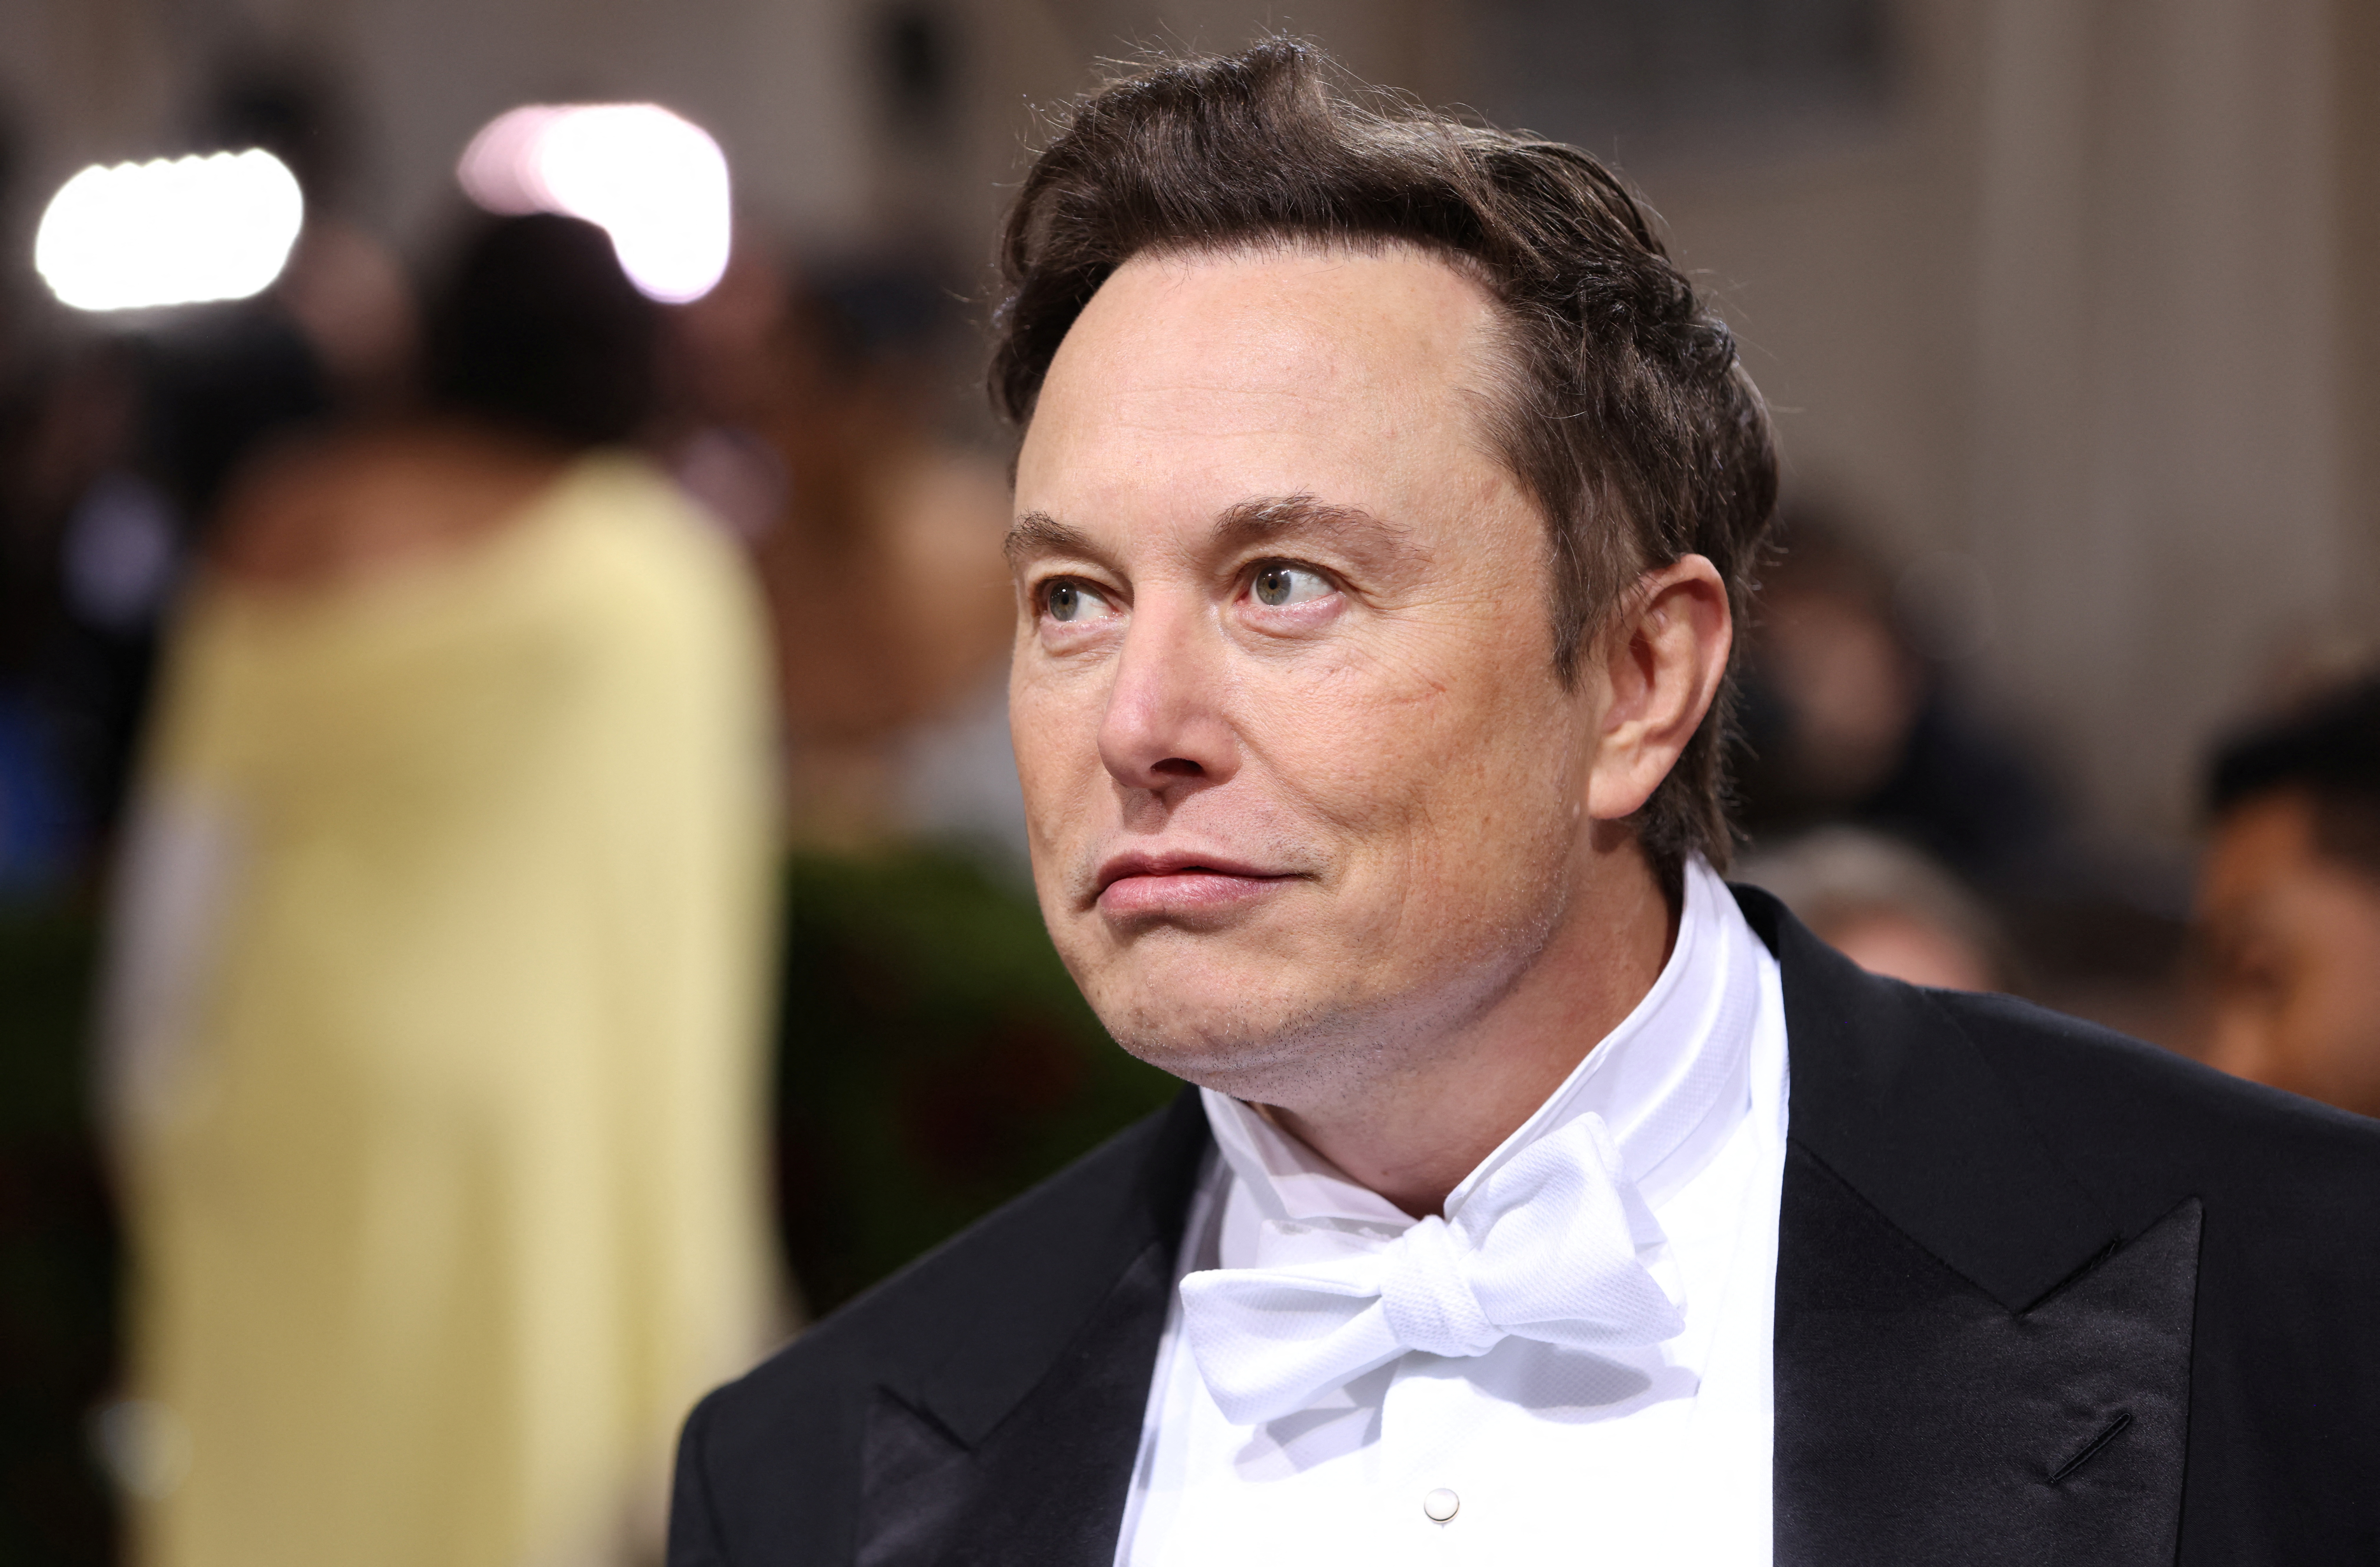 Elon Musk's child seeks name change to sever ties with father